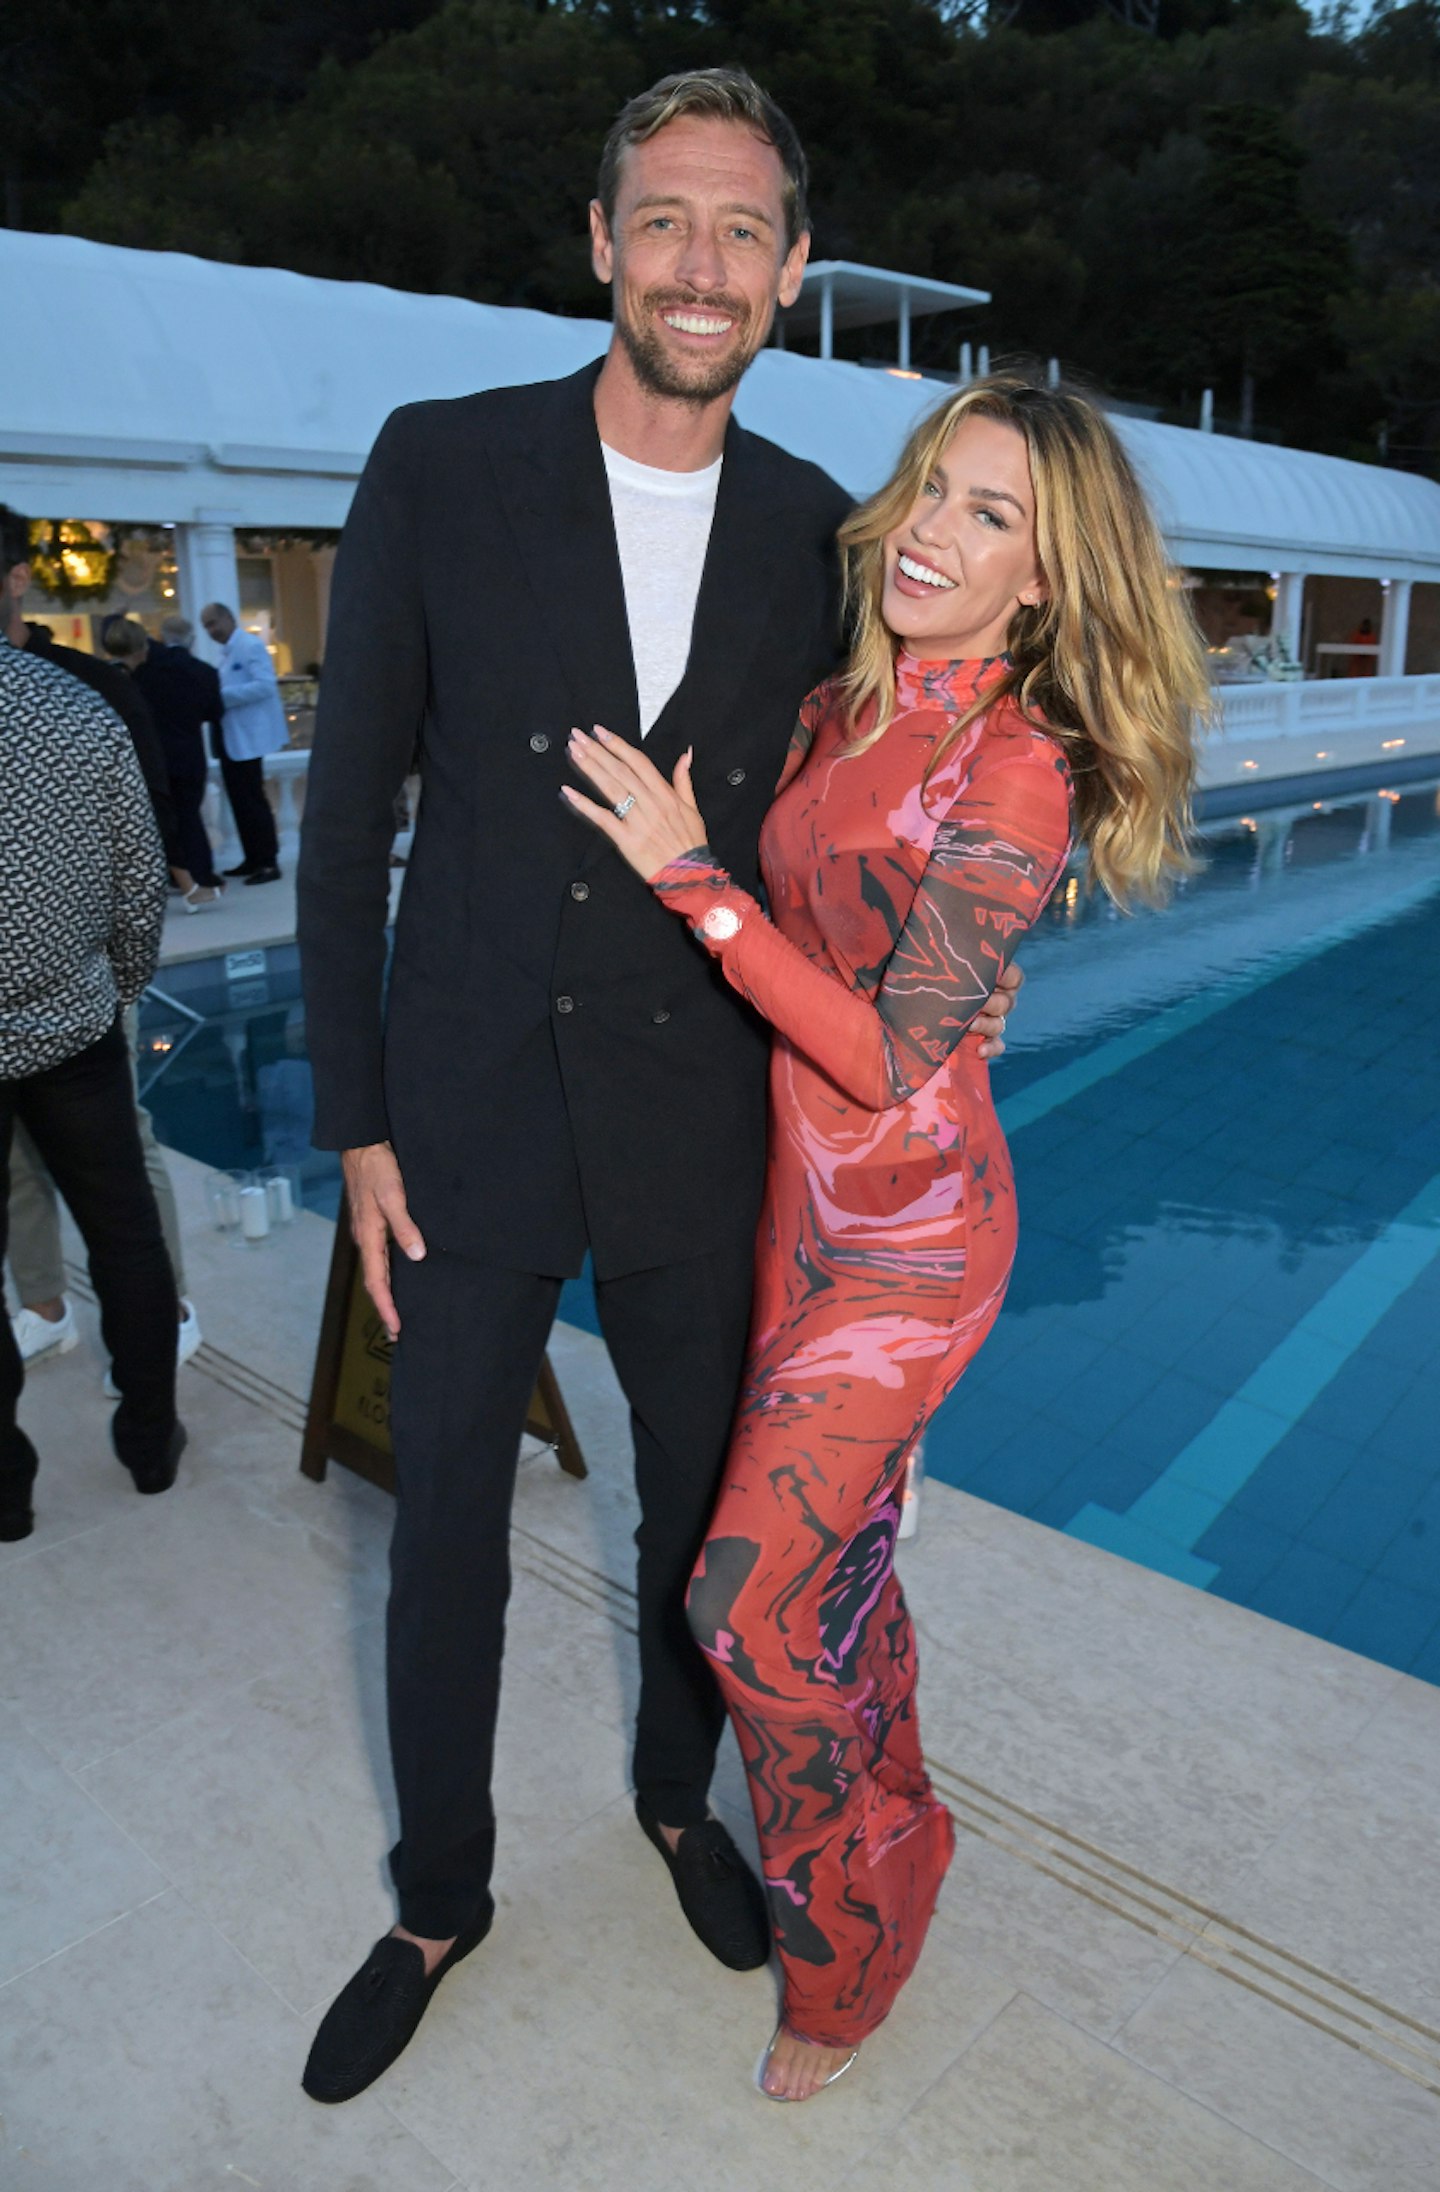 Abbey Clancy and Peter Crouch